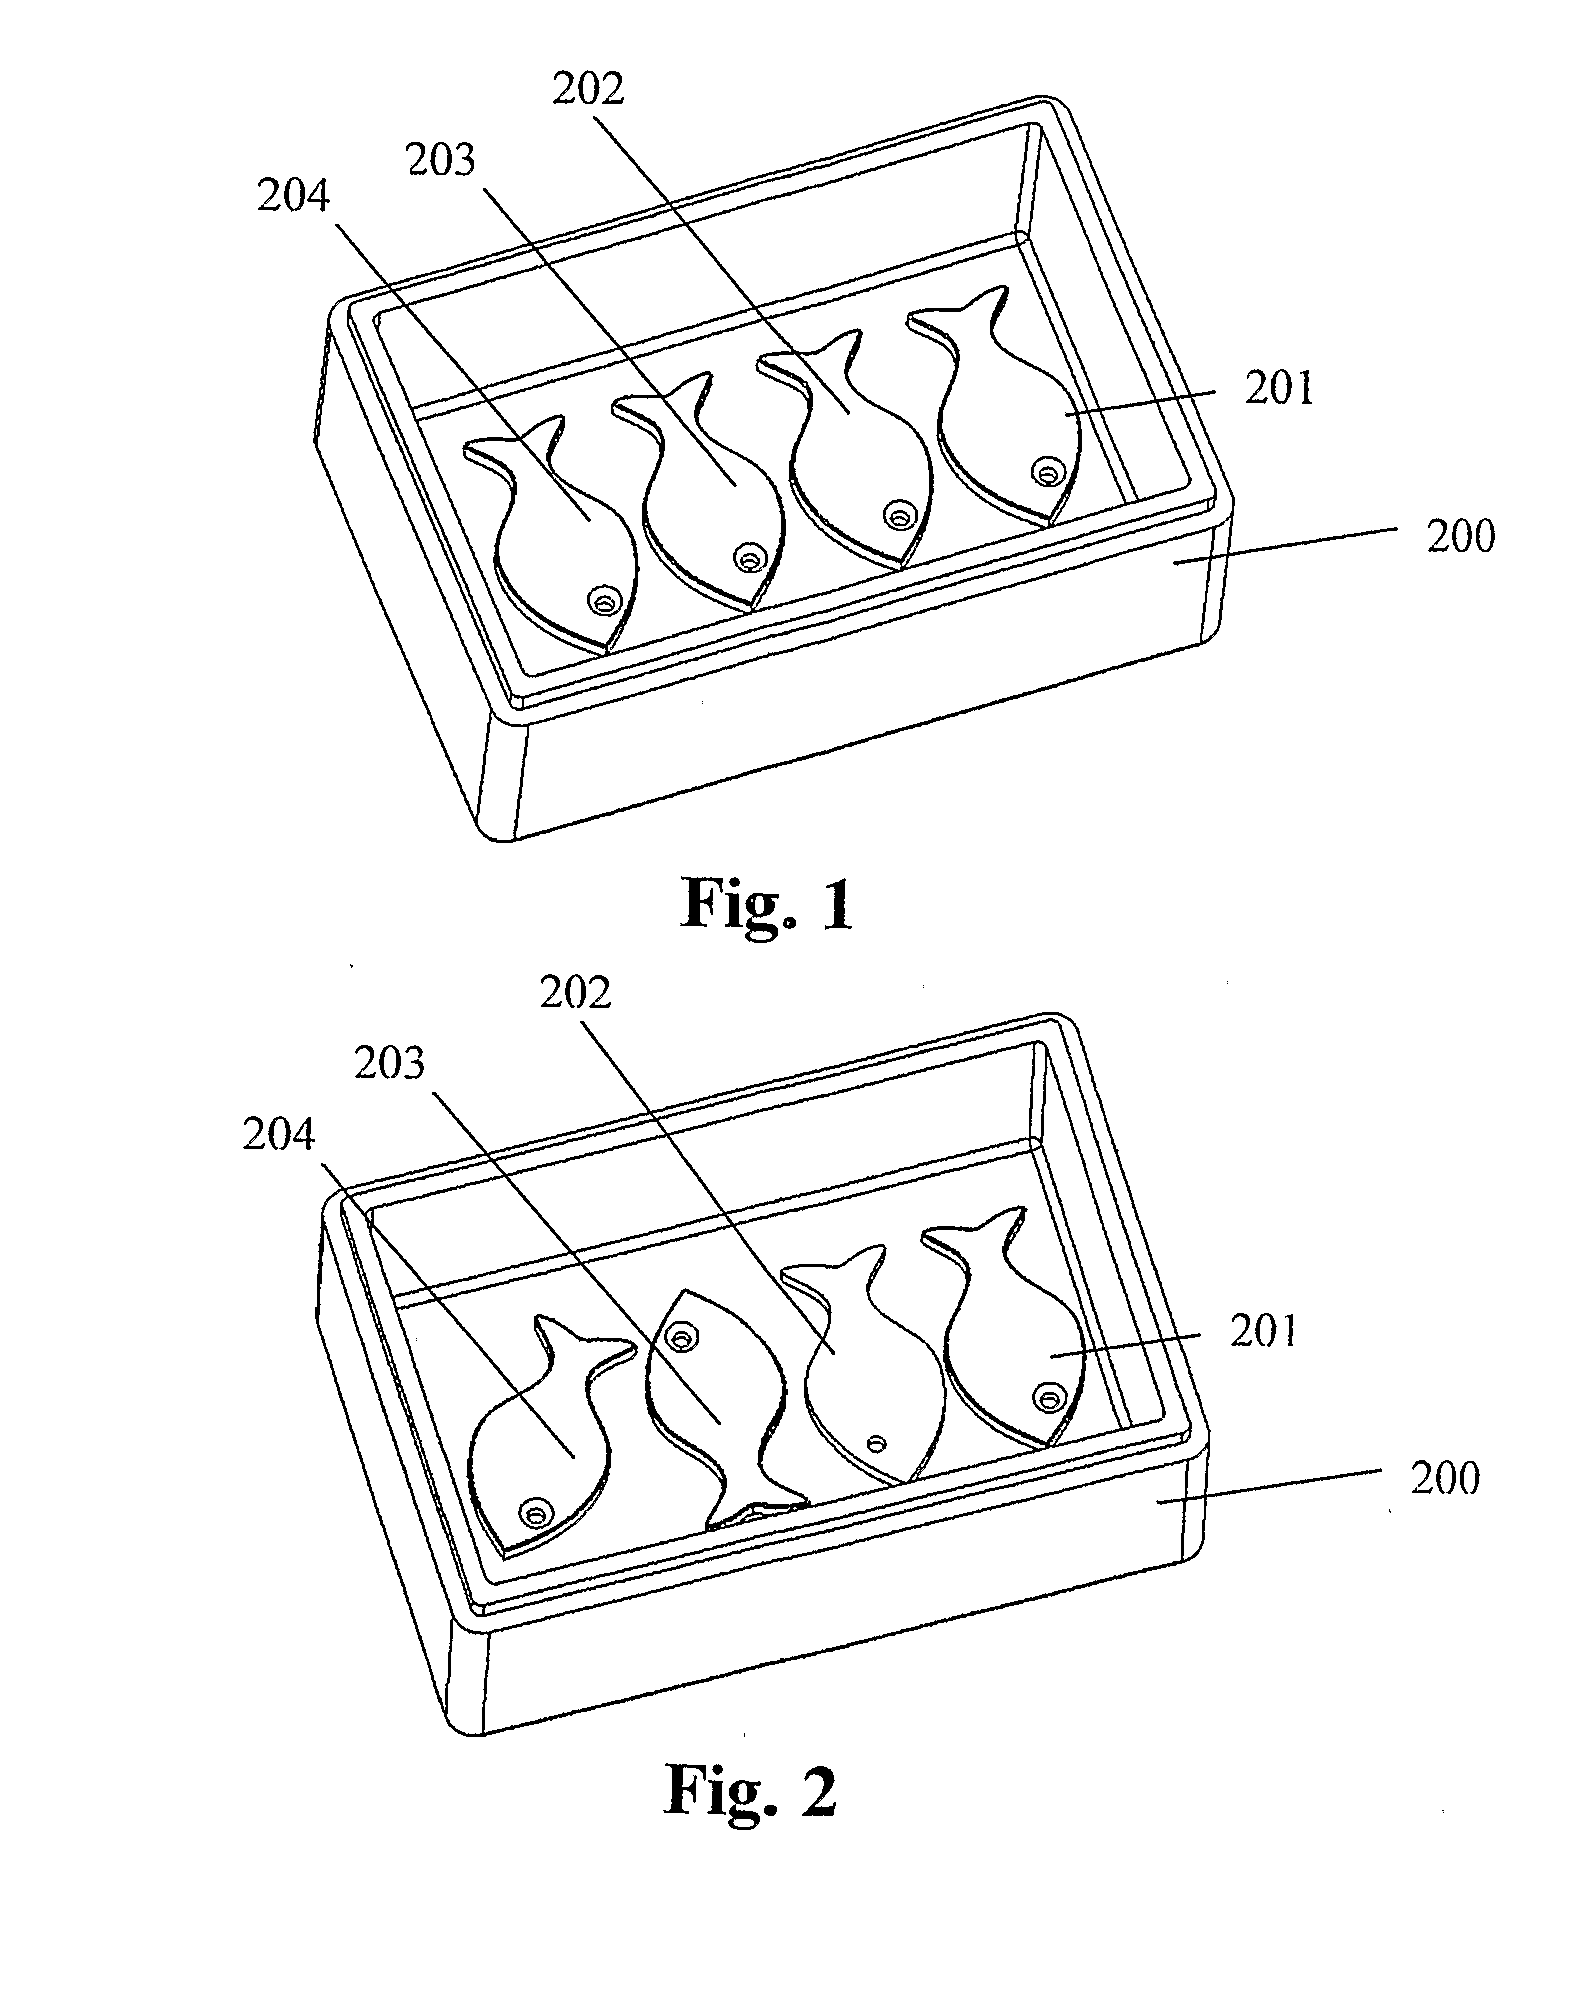 Apparatus and method for grading articles based on weight, and adapted computer program product and computer readable media